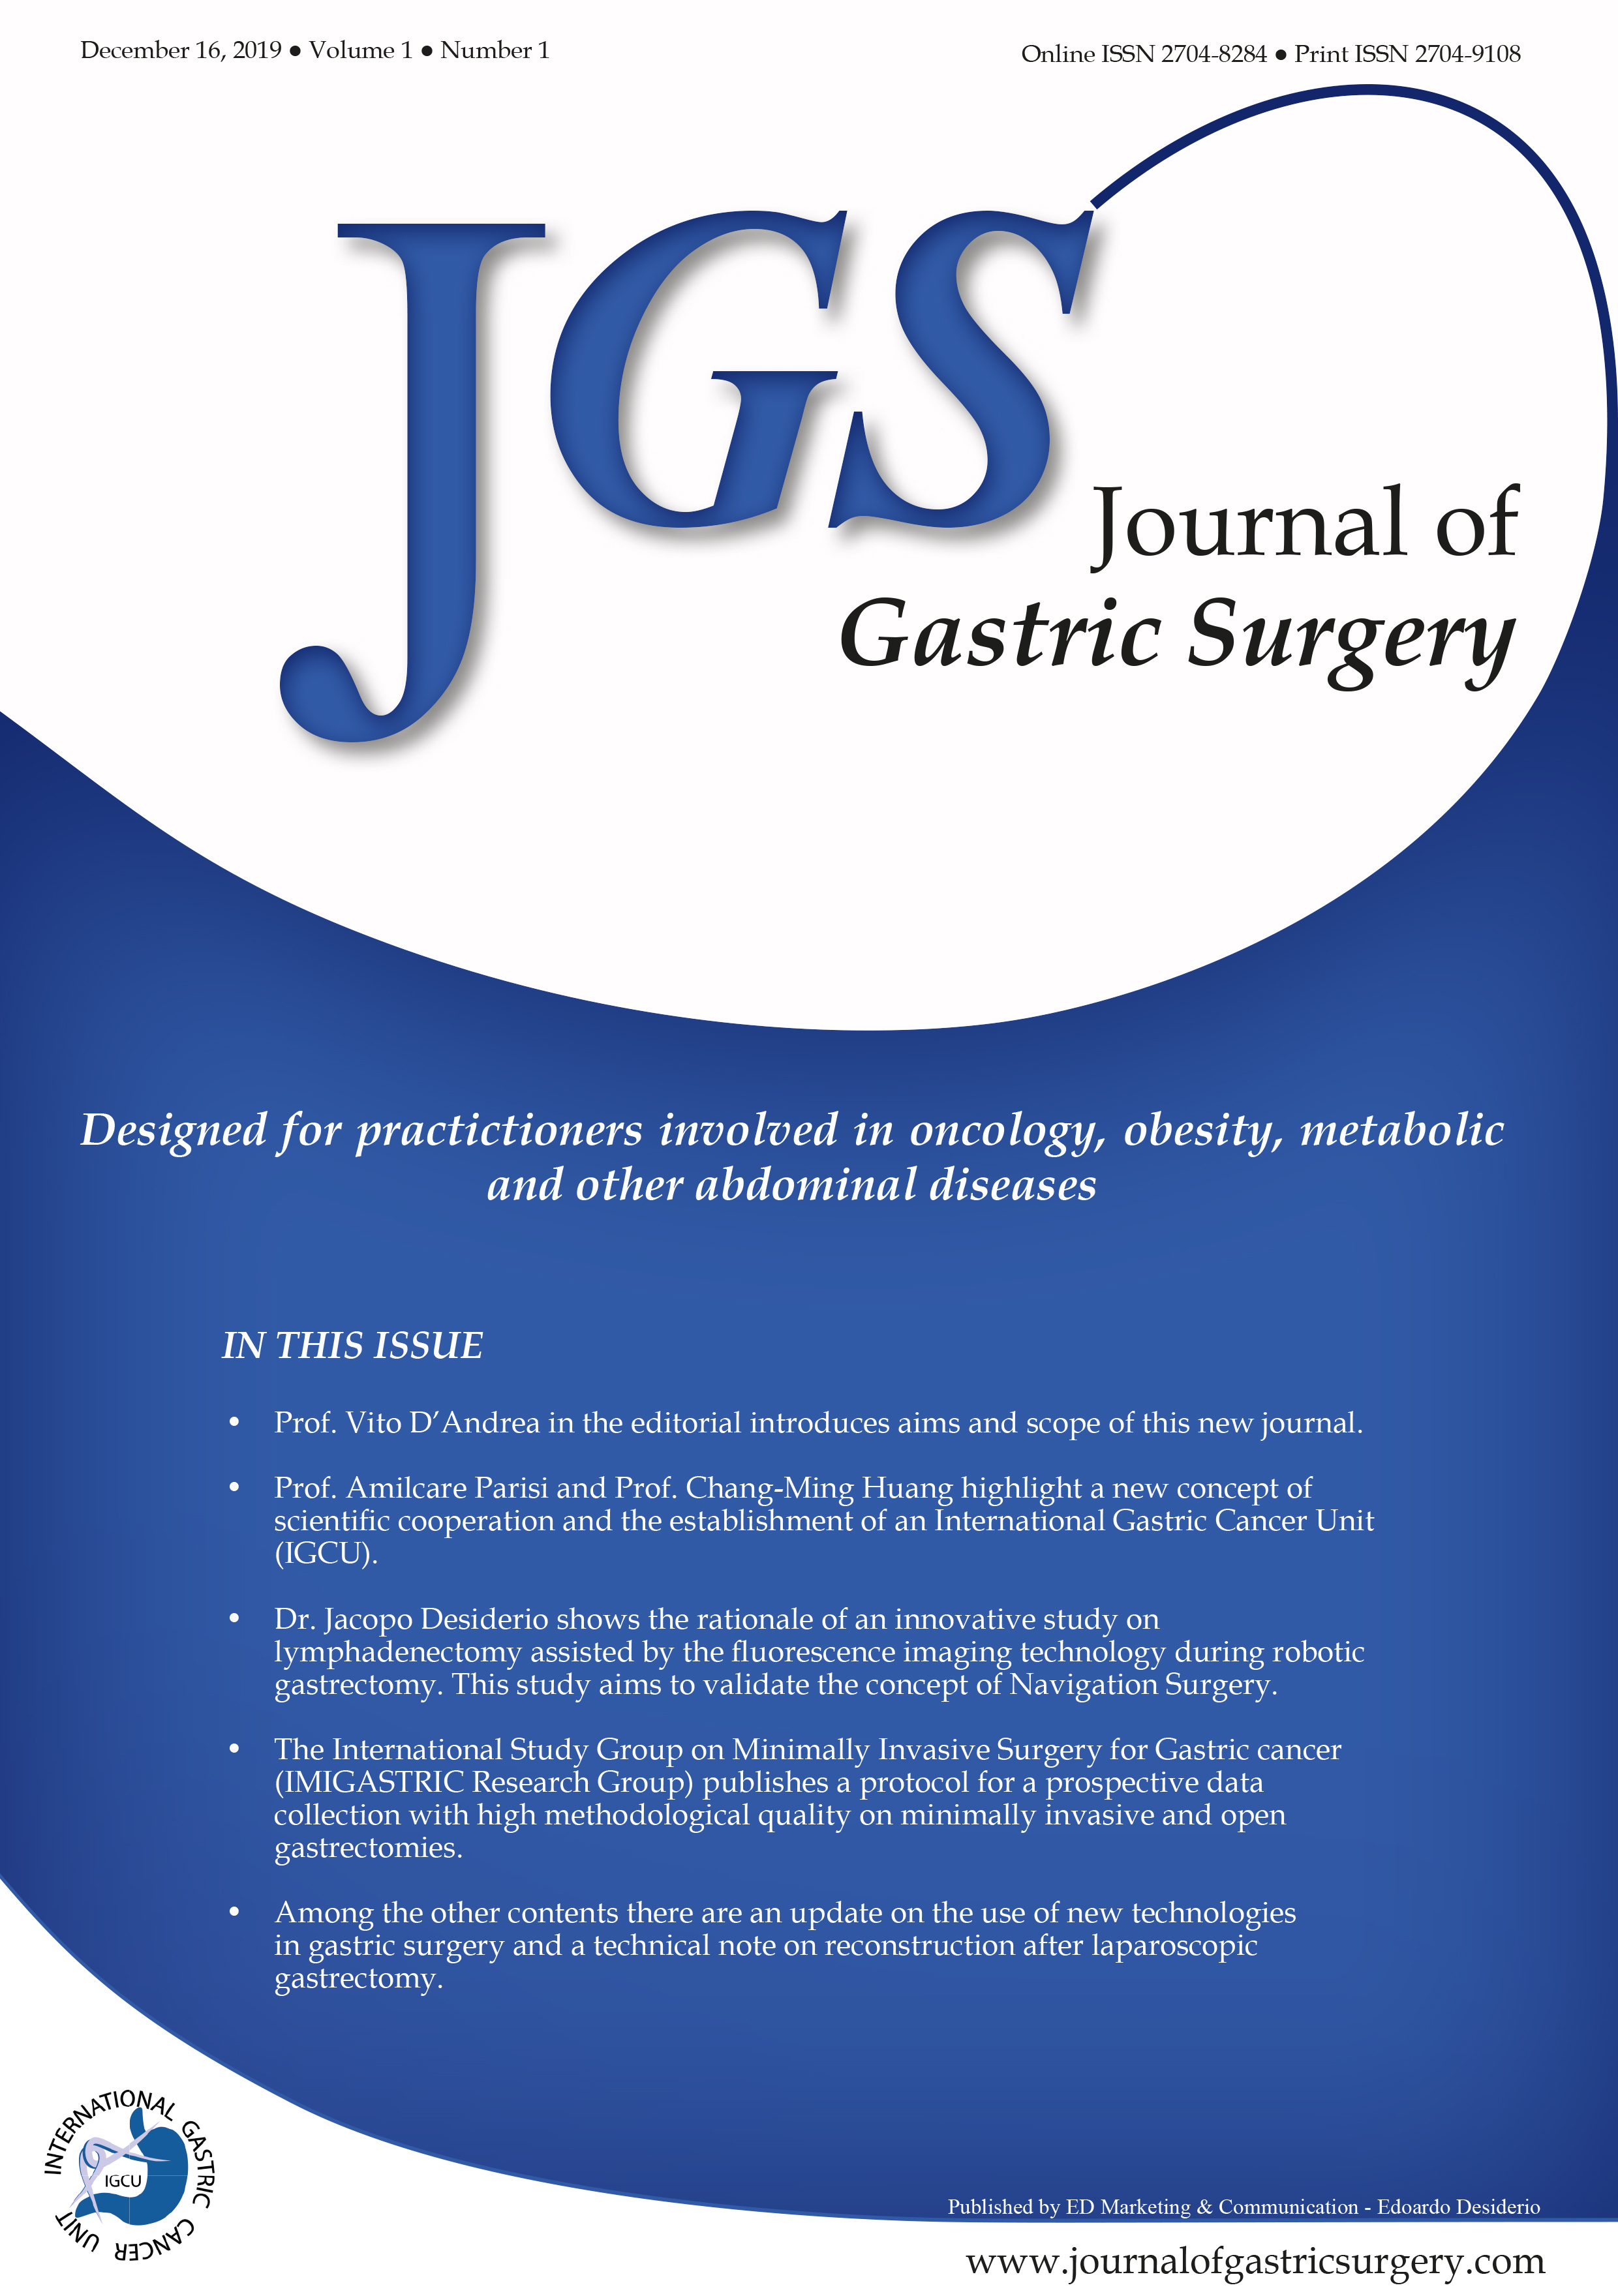 Journal of Gastric Surgery Vol 1 Issue 1 - Cover